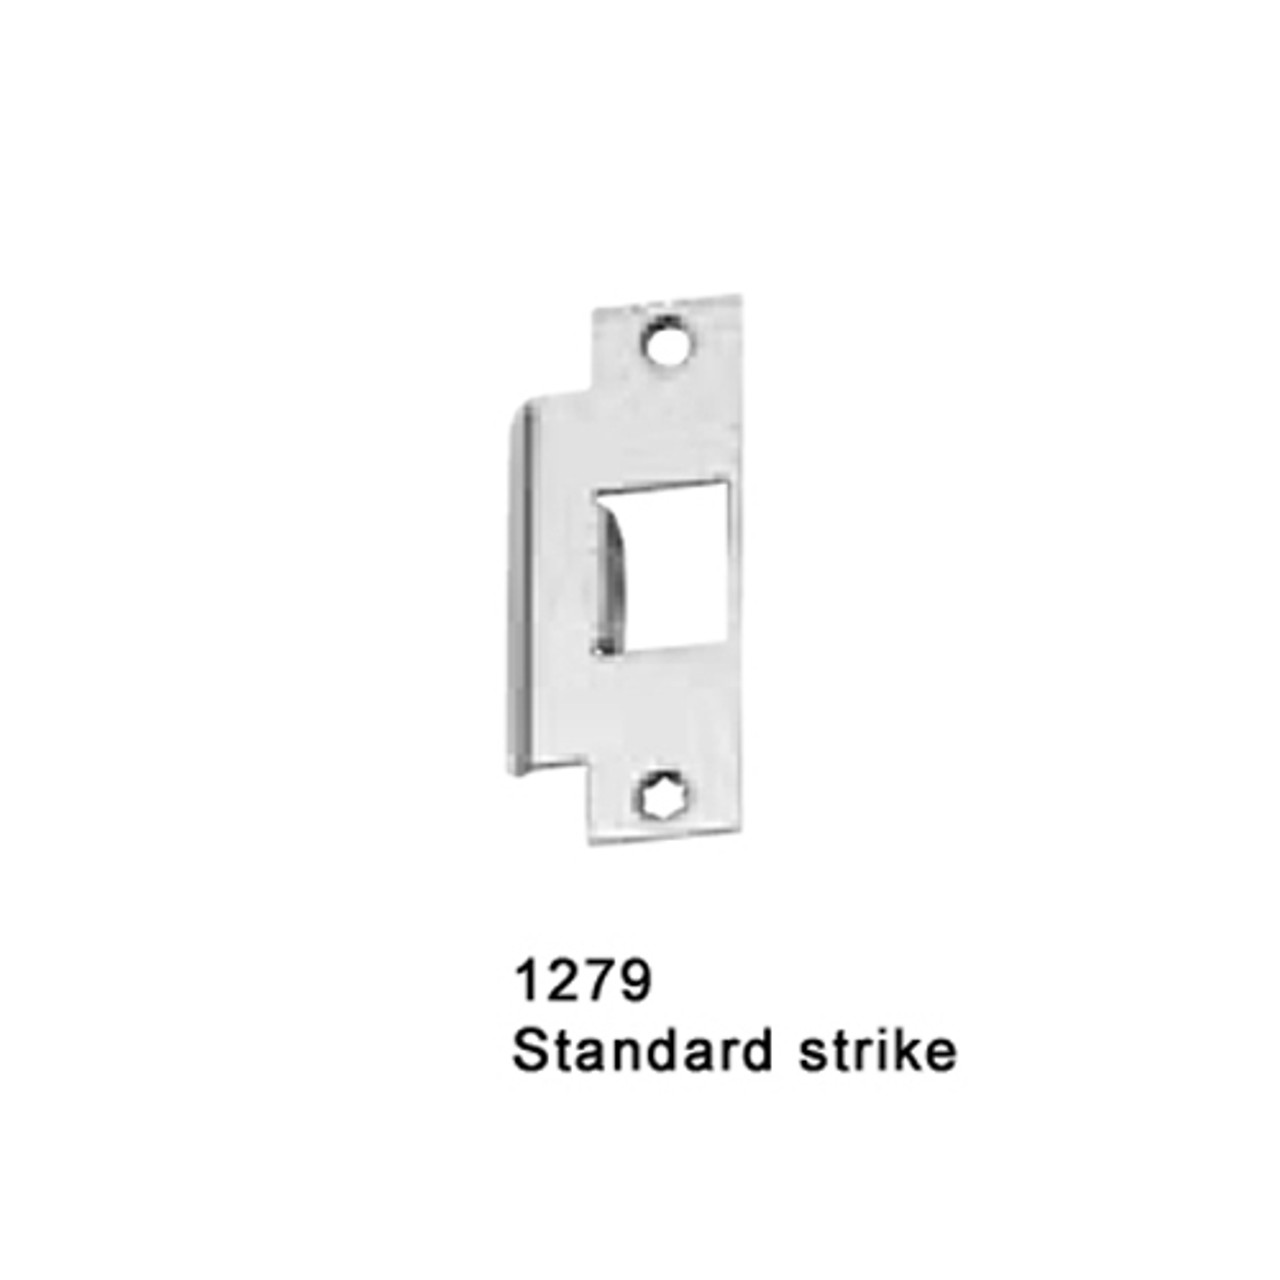 CD25-M-TP-BE-US10-4-RHR Falcon 25 Series Mortise Lock Devices 512TP-BE Thumbpiece Trim with Blank Escutcheon in Satin Bronze